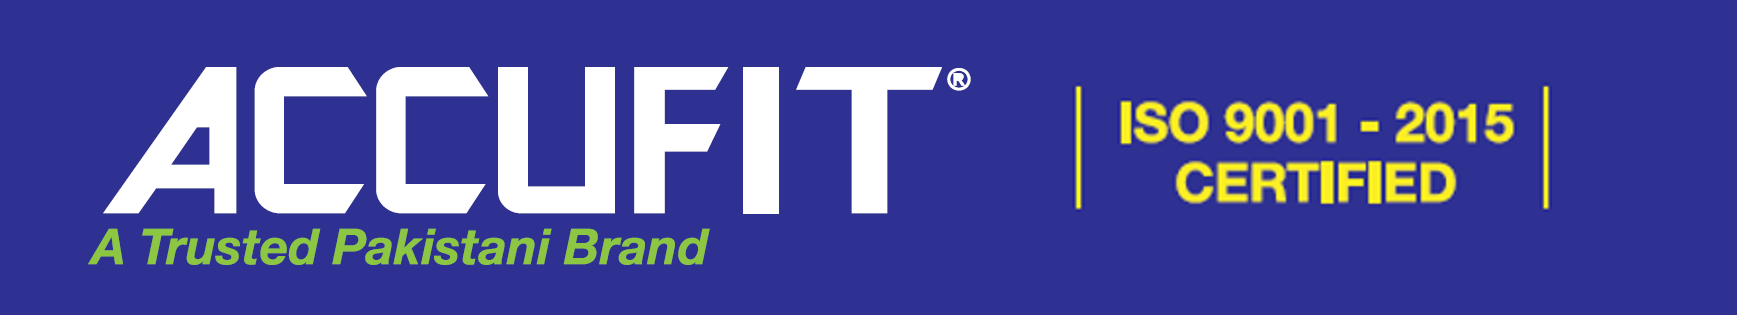 Accufit Banner